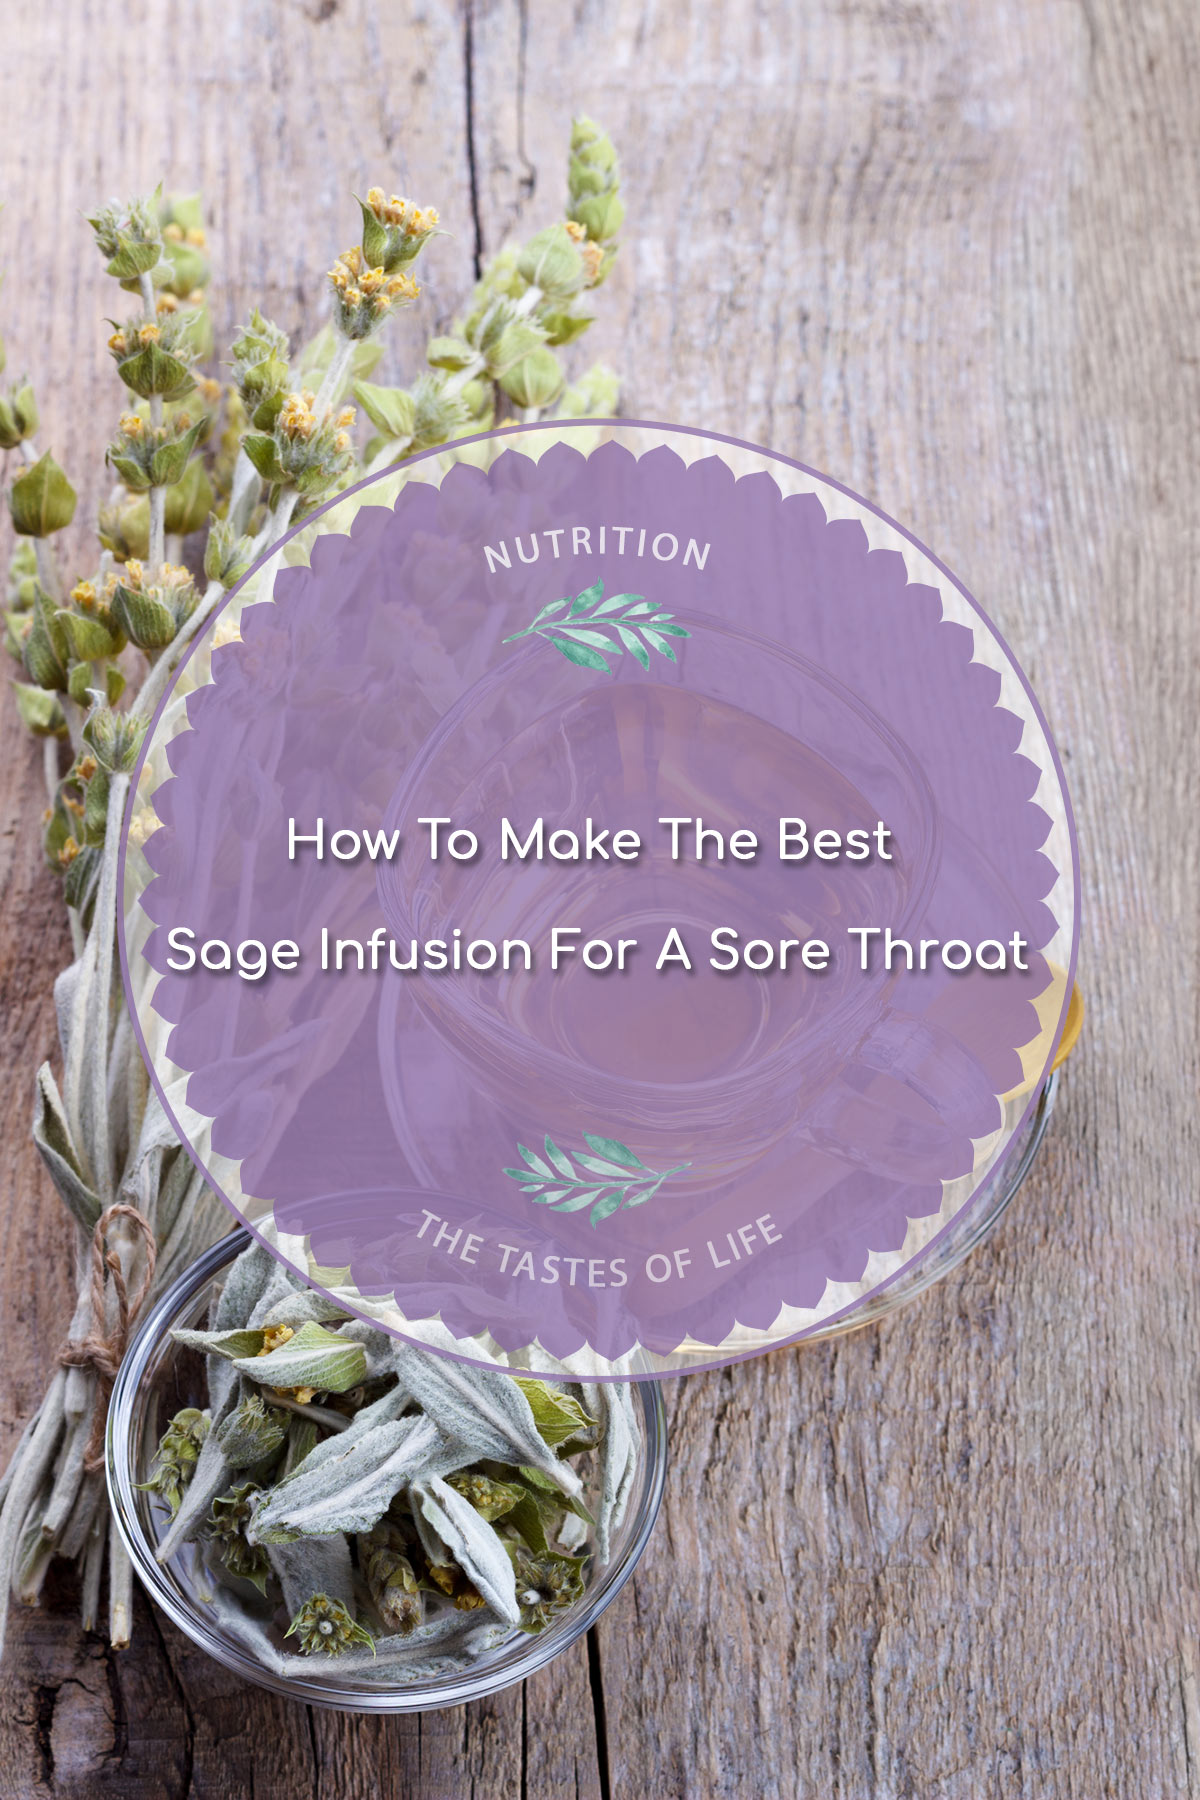 How To Make The Best Sage Infusion For A Sore Throat